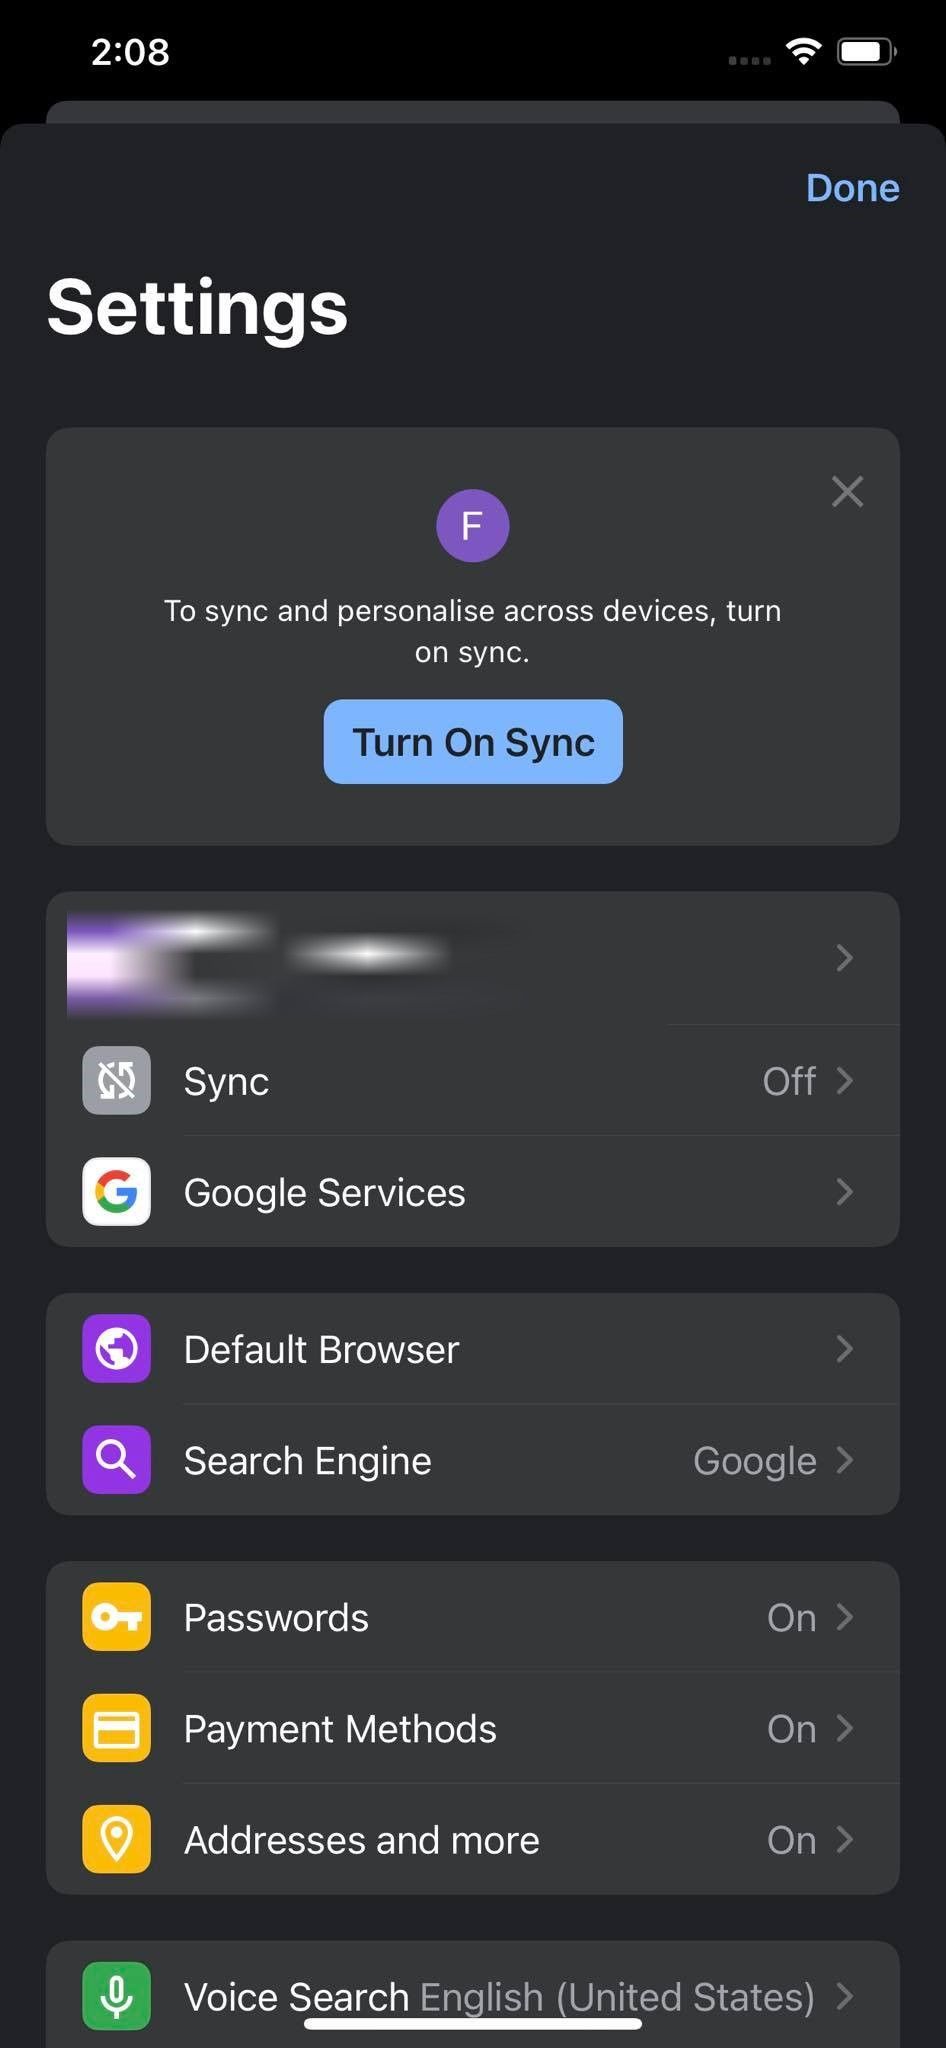 Google Services Option in Settings of Chrome for iOS